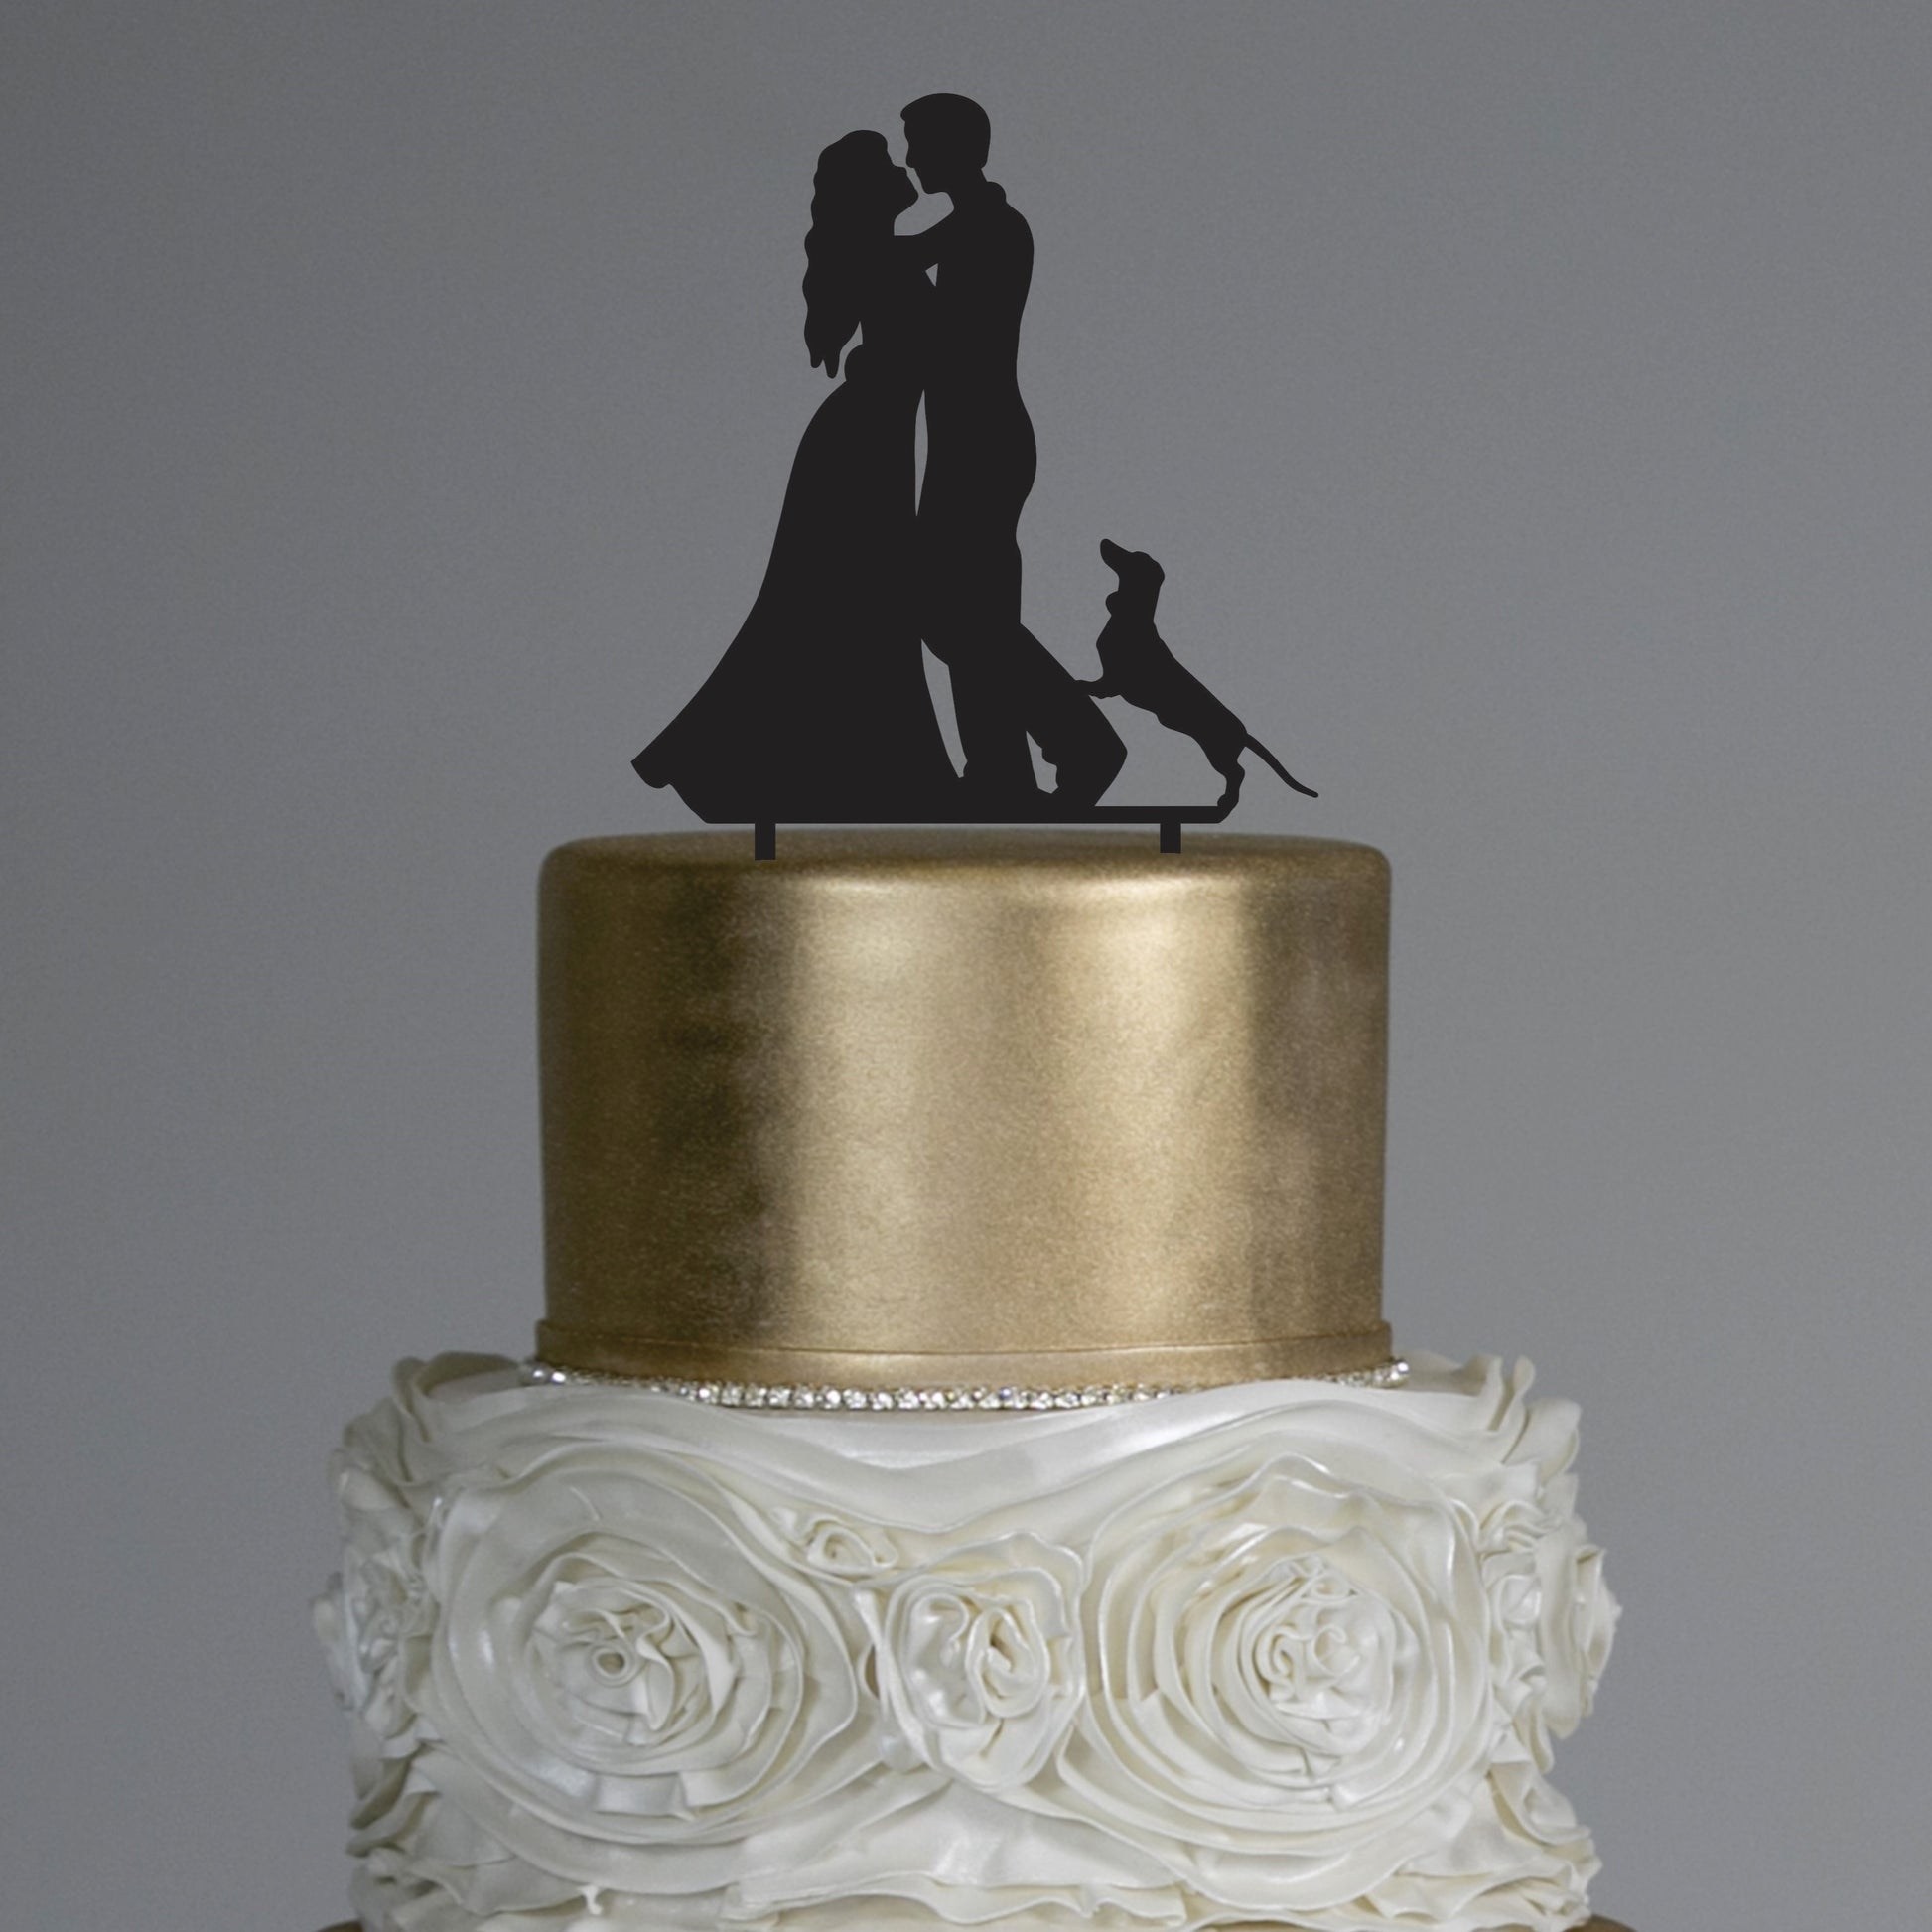 Wedding Cake Toppers: 46 Unique Ideas for Every Couple - hitched.co.uk -  hitched.co.uk